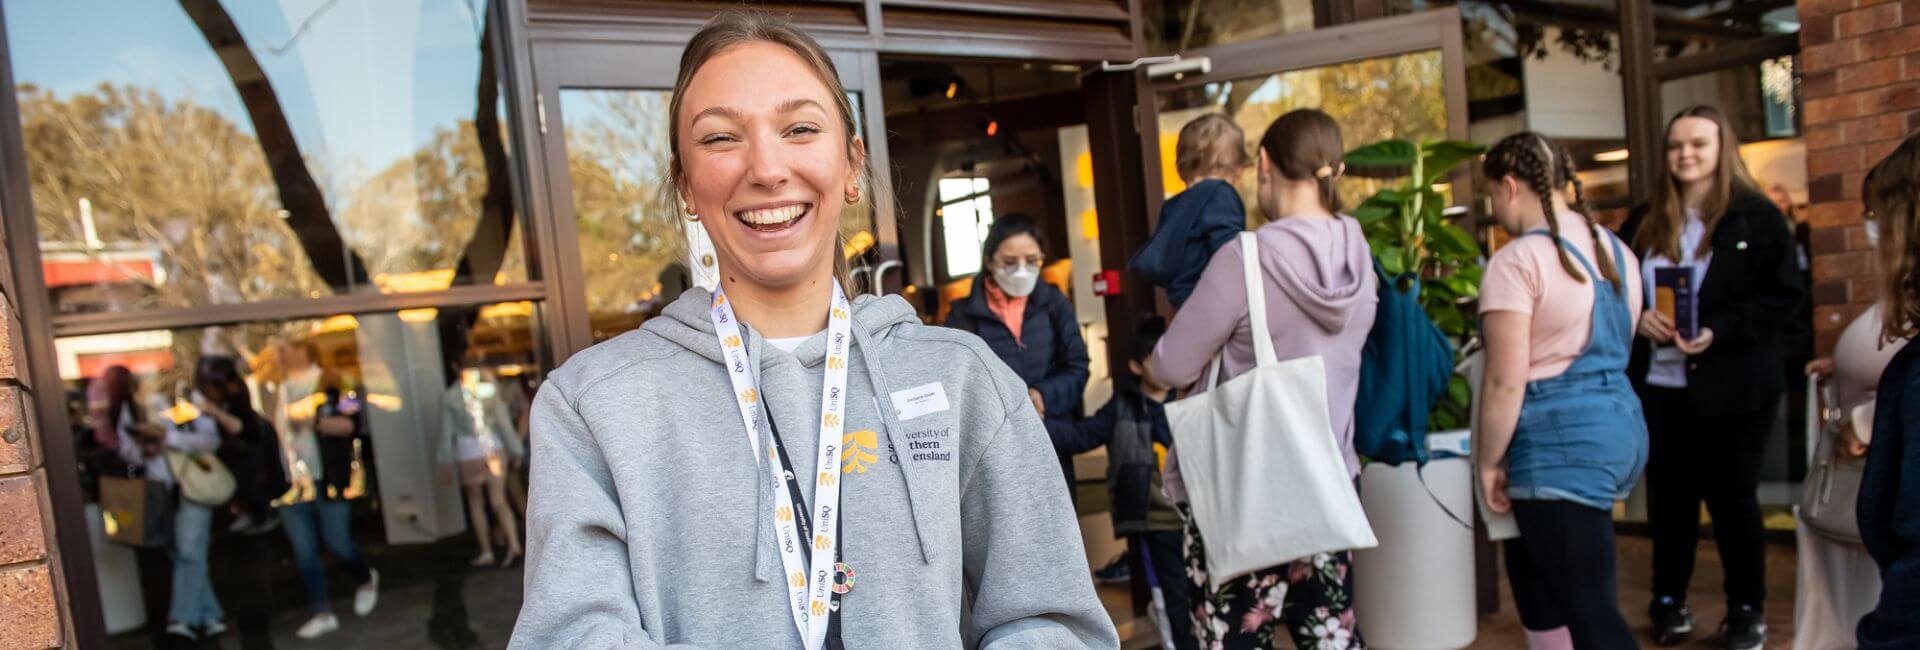 A smiling woman wearing a lanyard and hoodie greets at an event entrance, with other people in the background.